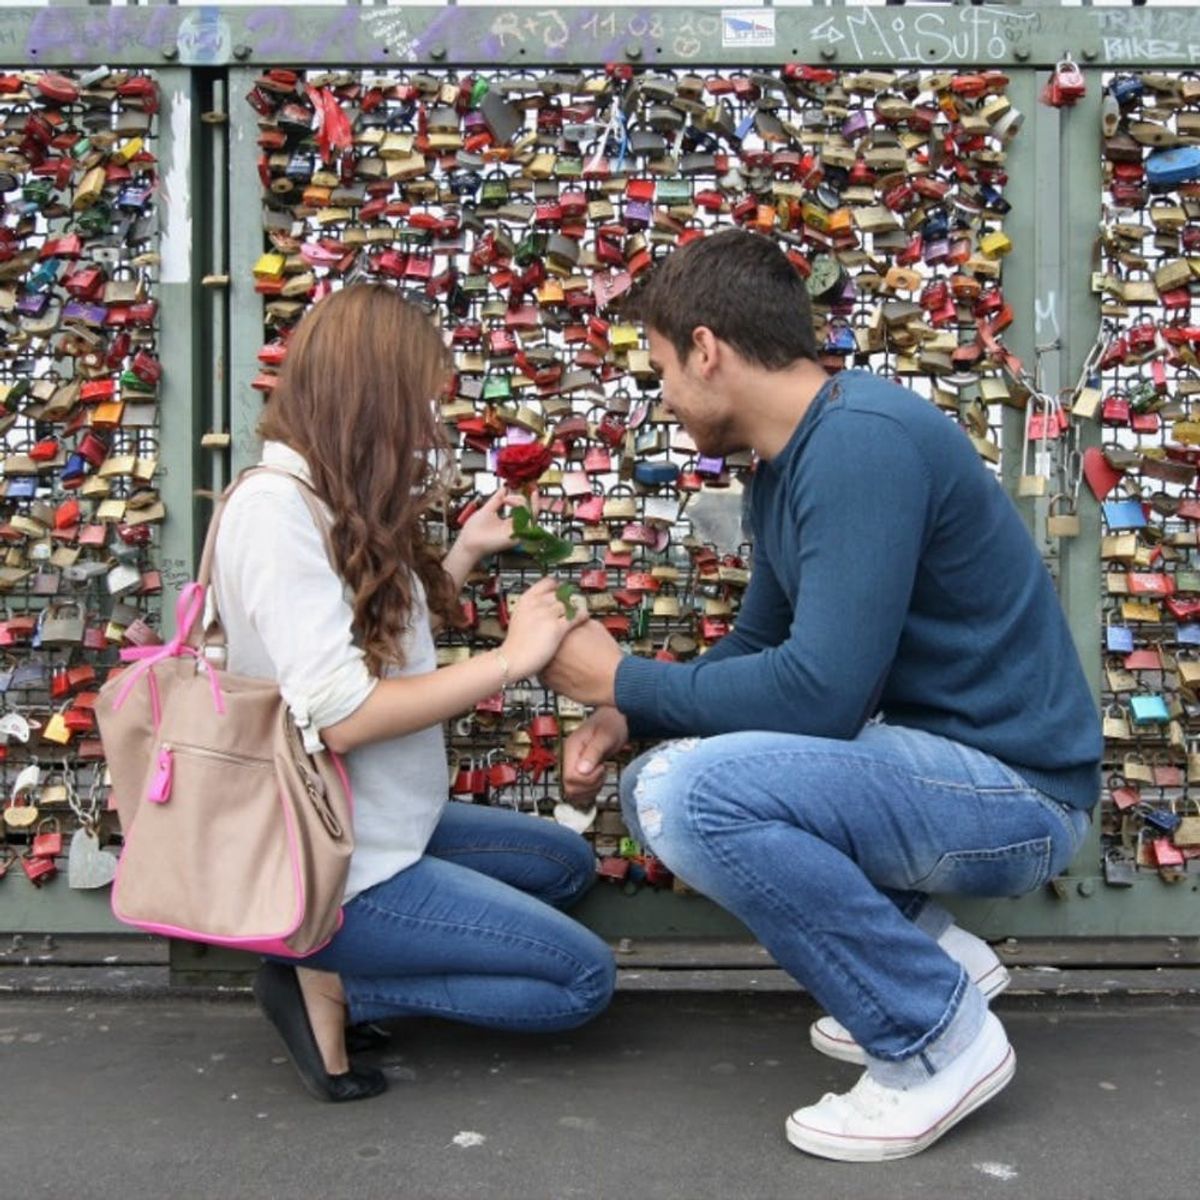 6 Must-Visit Spots to Make Your Relationship Official With a Love Lock